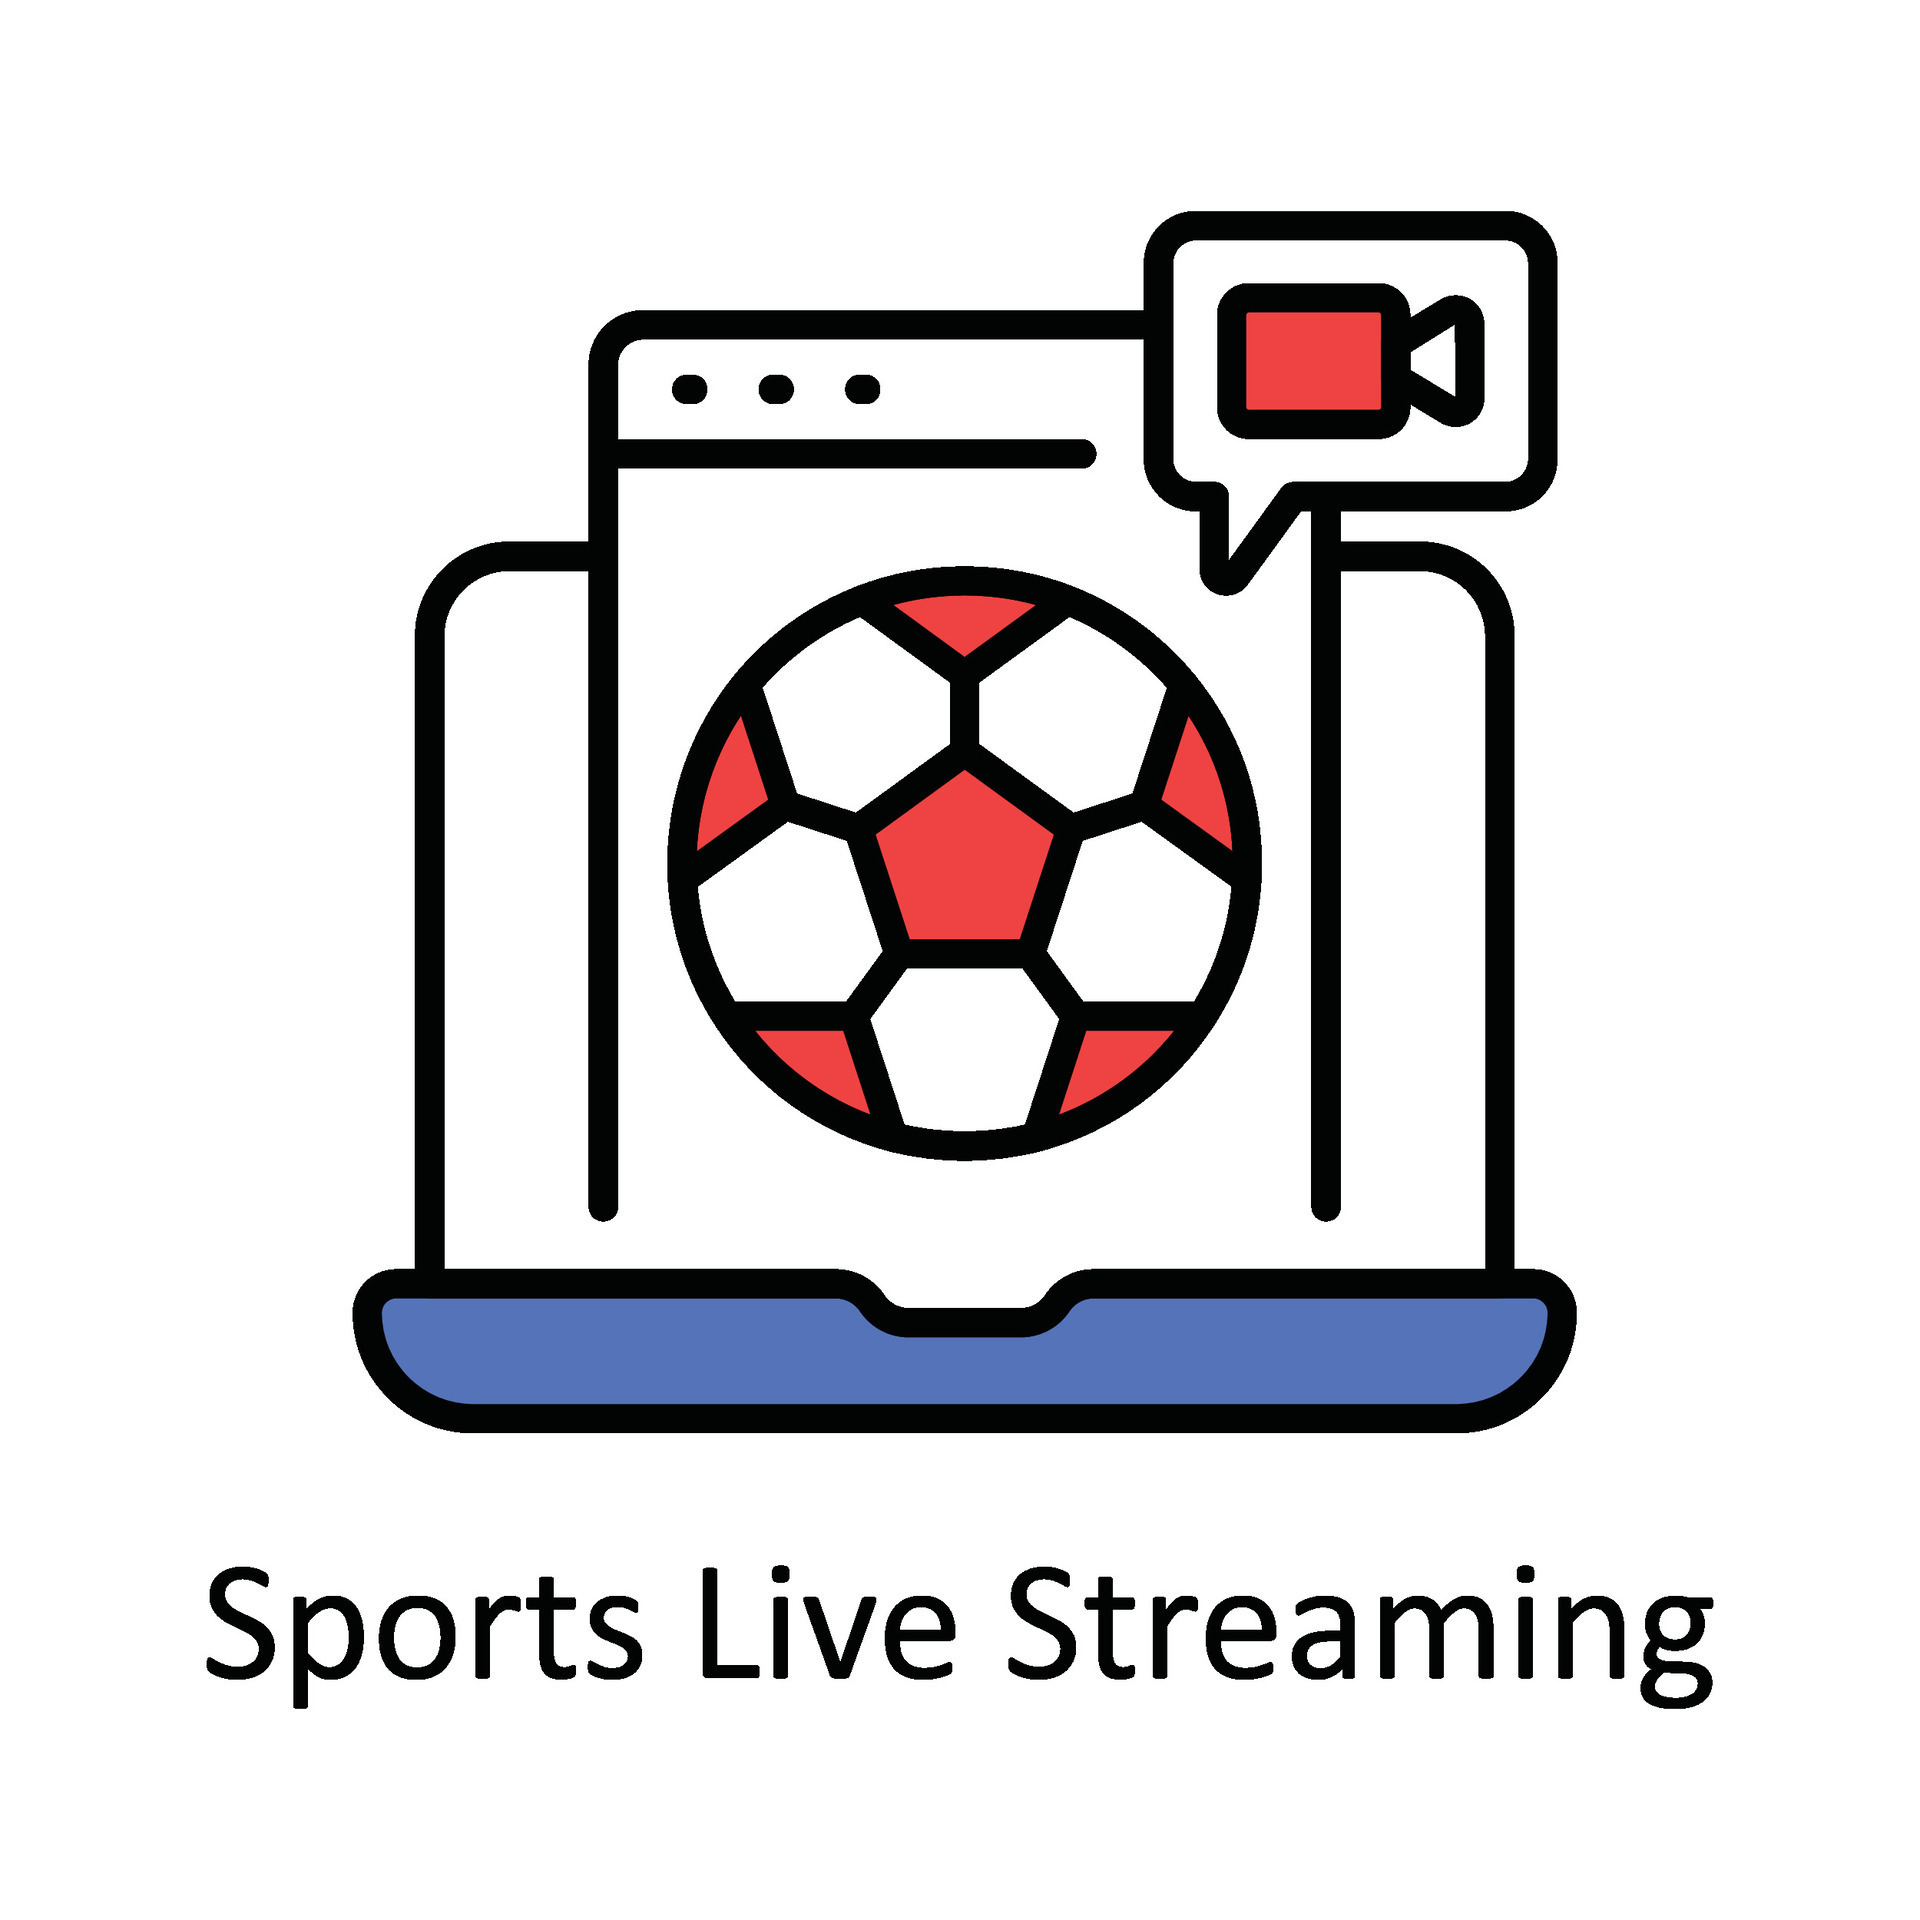 Sports Live Streaming Vector Fill outline Icon Design illustration